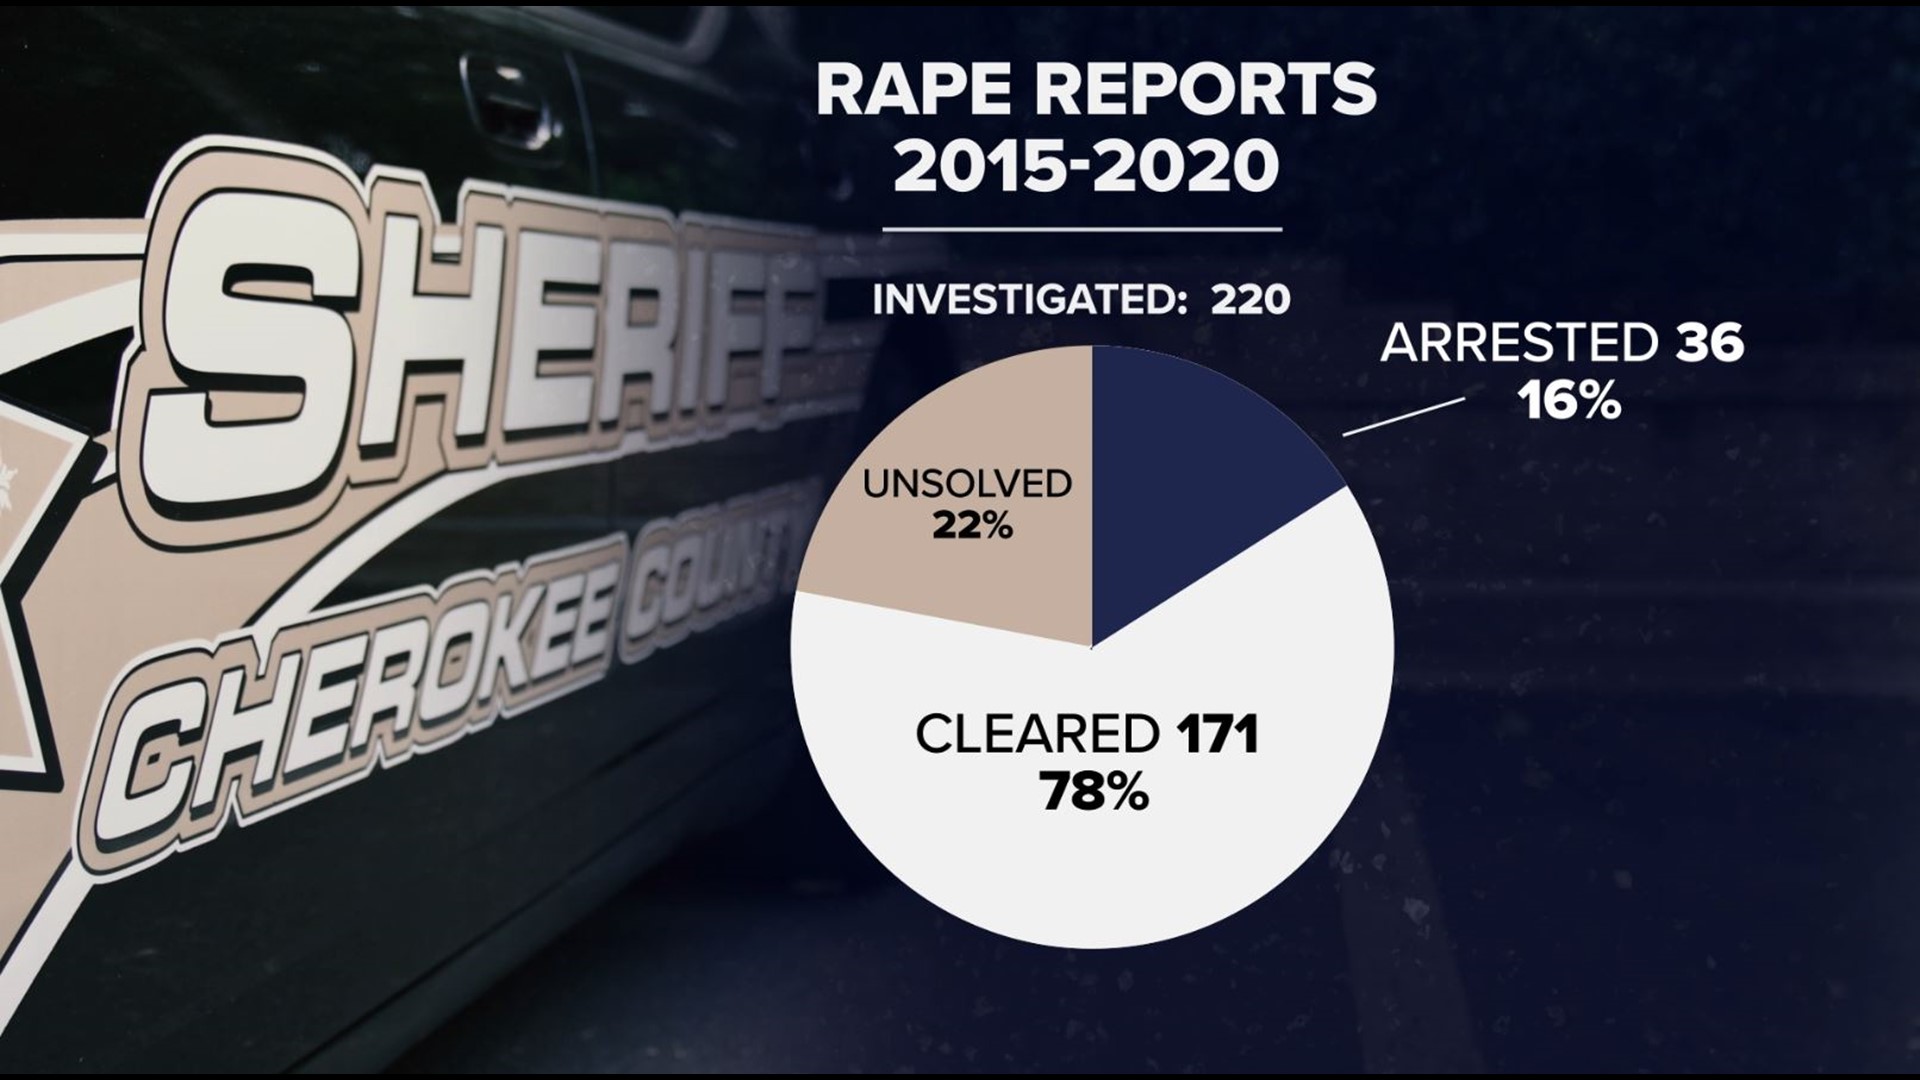 11Alive investigation found multiple local police departments use exceptional clearance to close rape cases without prosecution. Here's what we found.